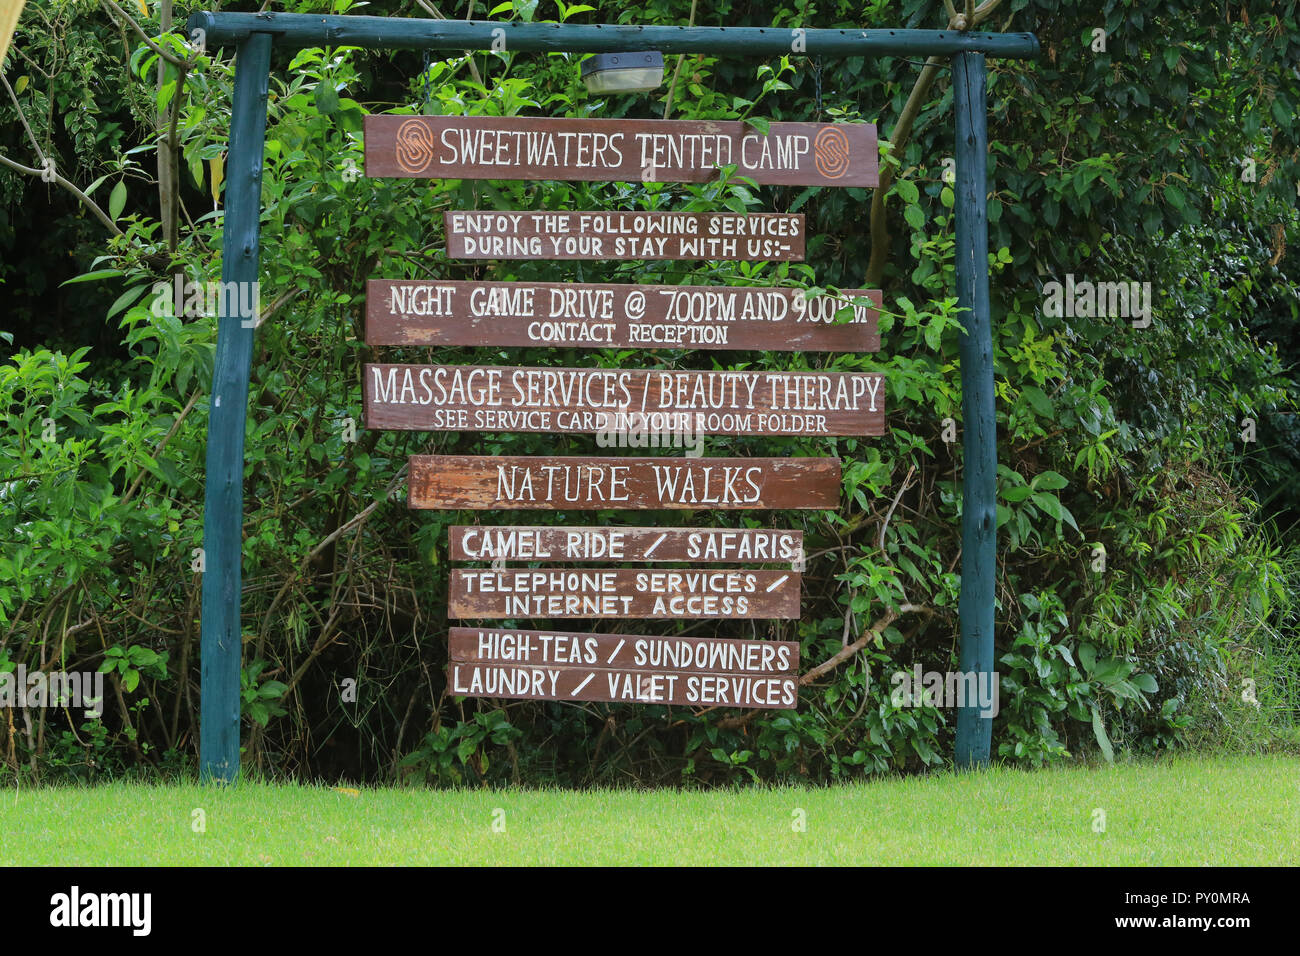 The sign listing available services at Sweetwaters Tented Camp near the Ol Pejeta Conservancy, Laikipia County, Kenya. Stock Photo